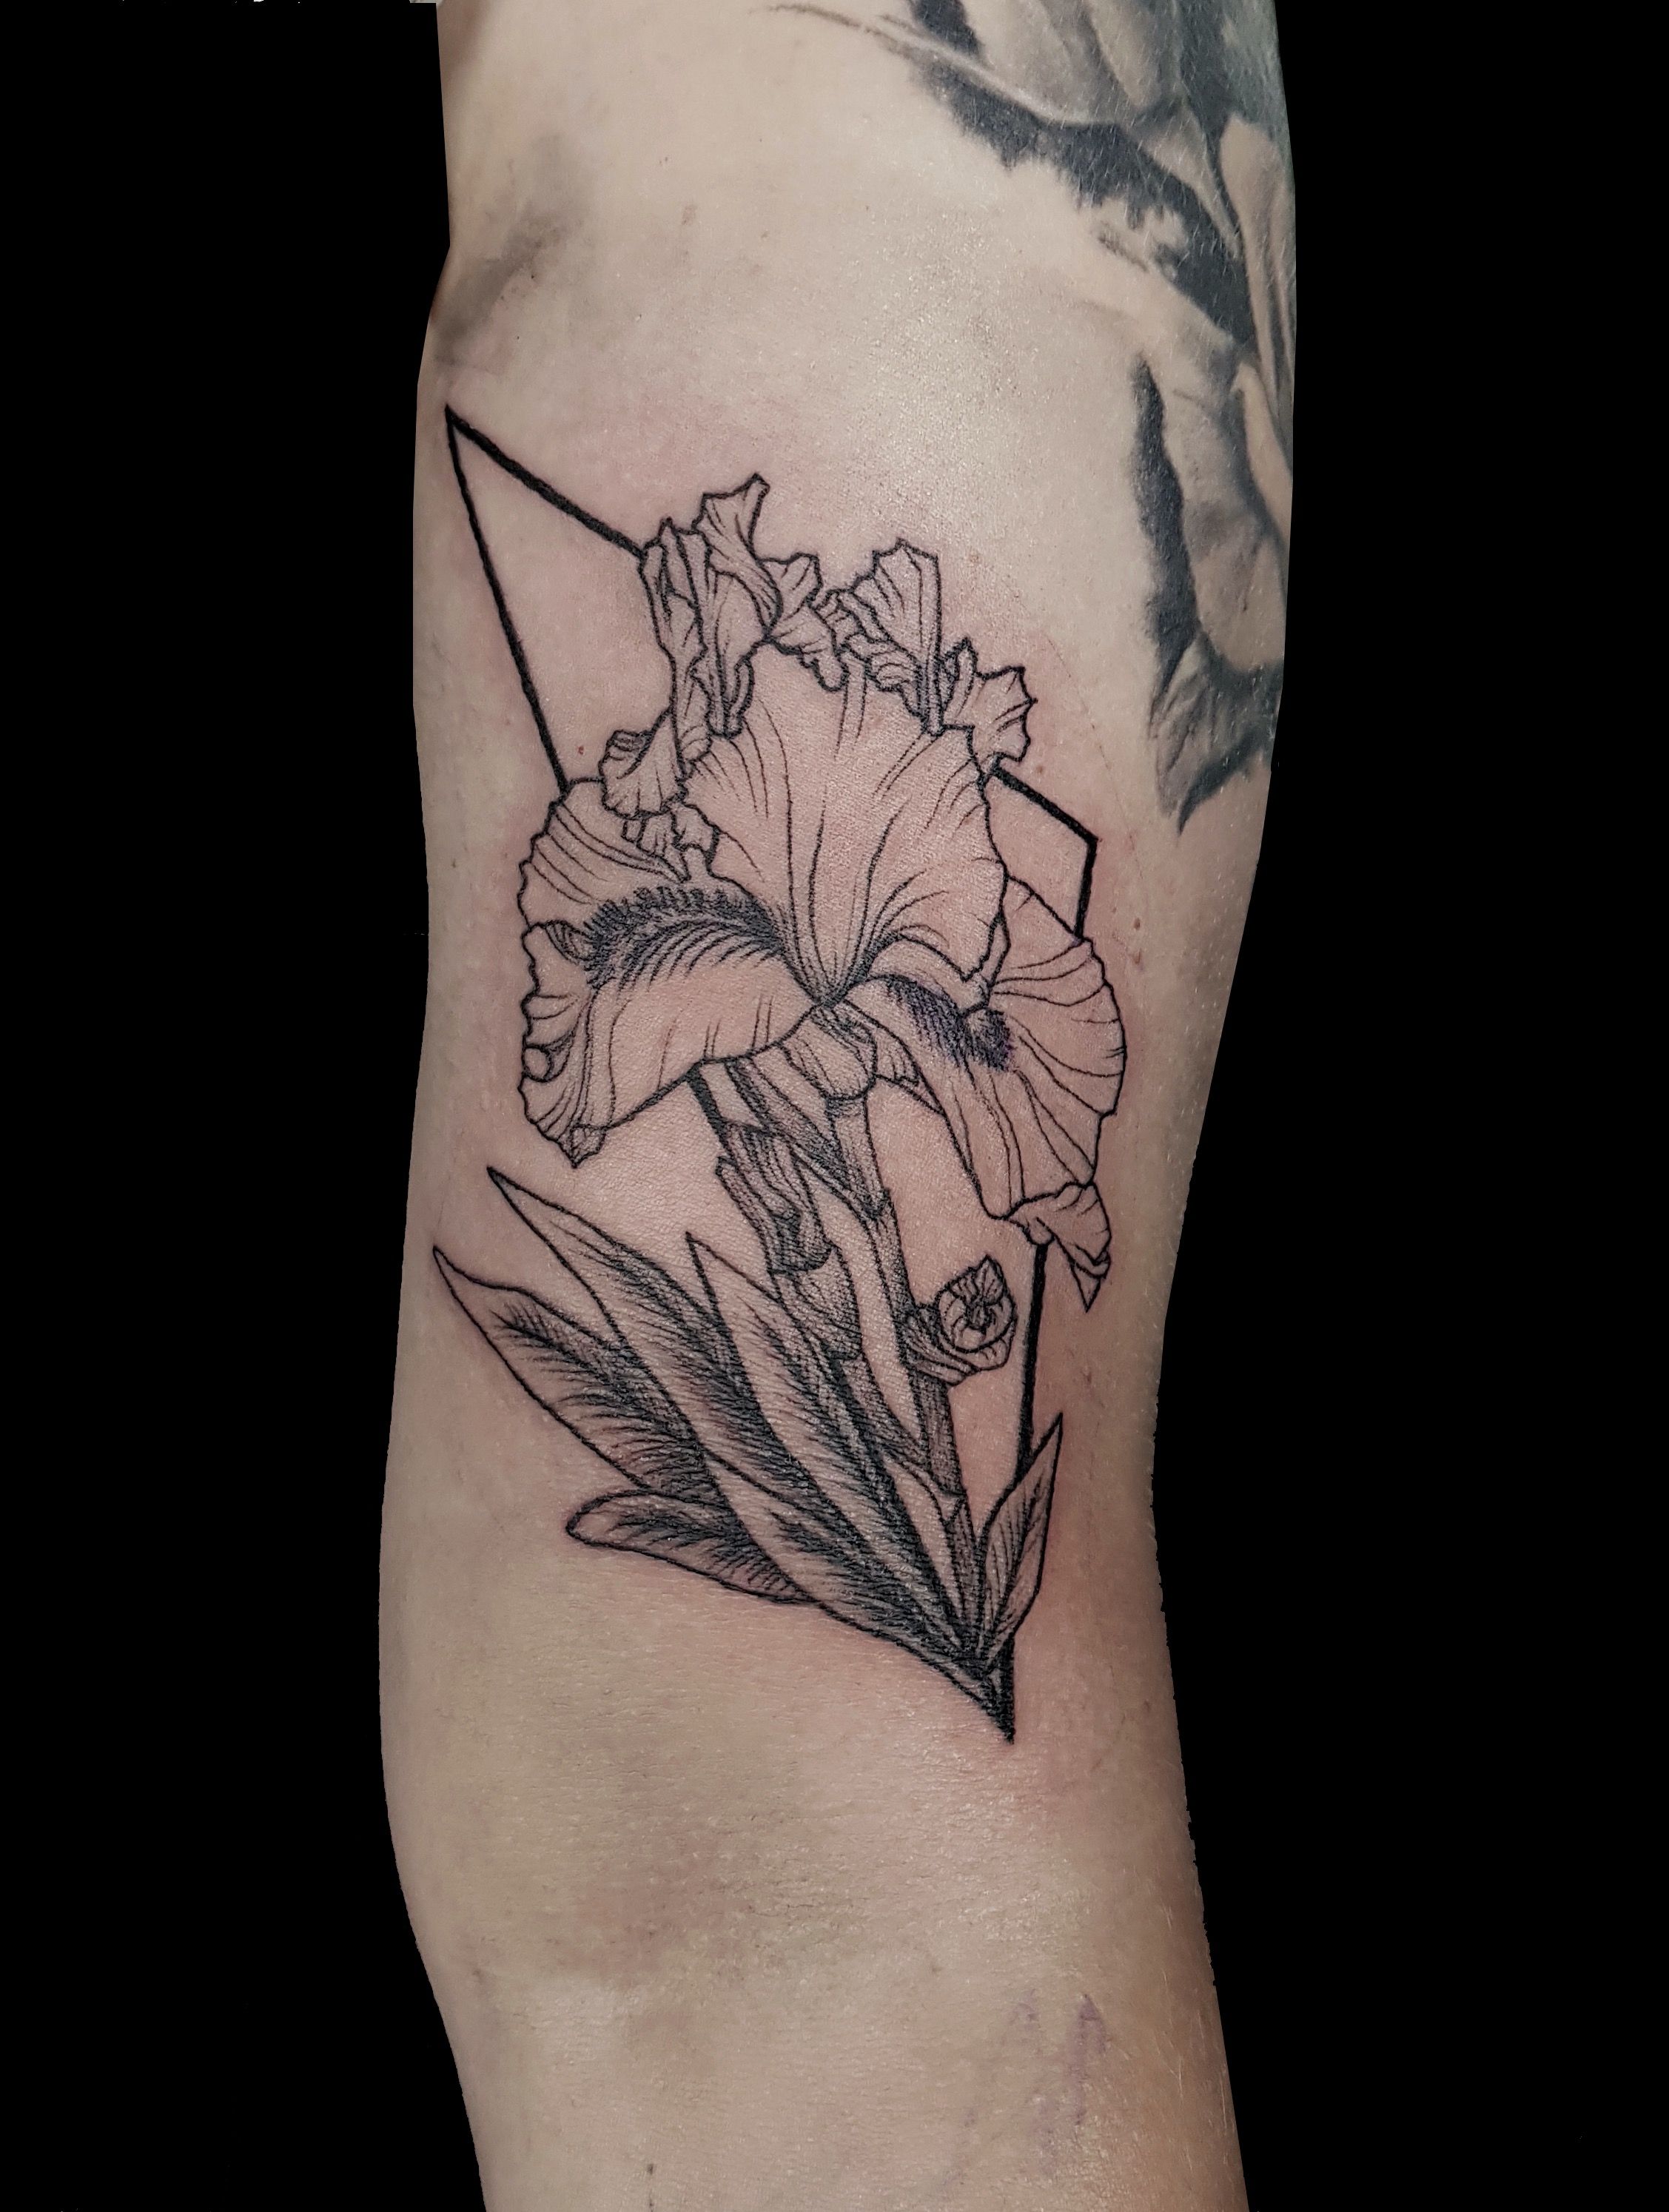 Floral Tattoo Meanings and History  CUSTOM TATTOO DESIGN